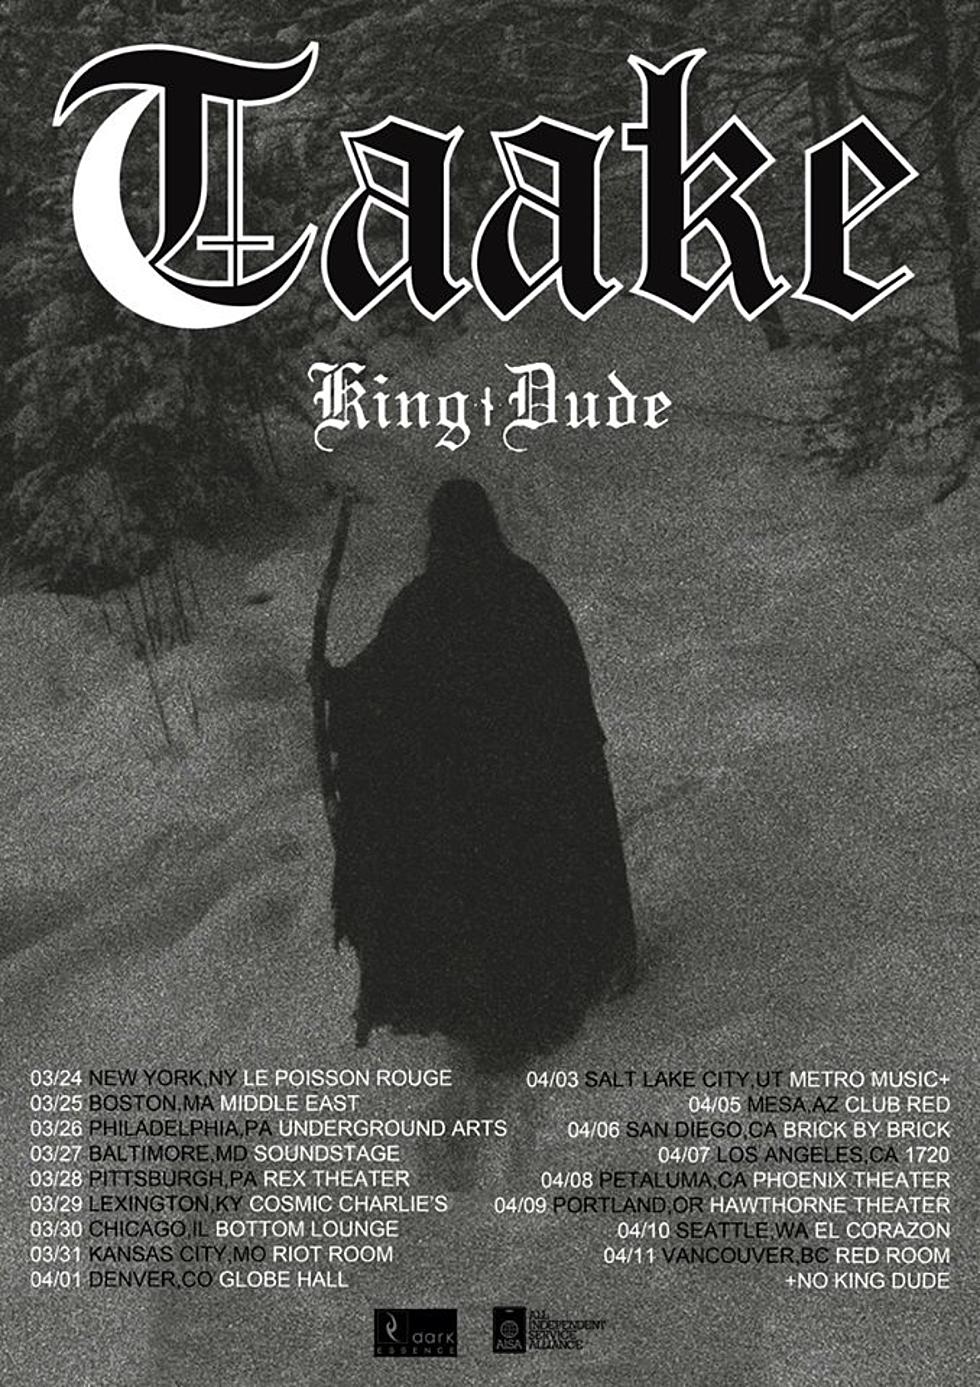 Taake respond to NYC show cancellation: &#8220;once and for all, Taake is not a racist band&#8221;